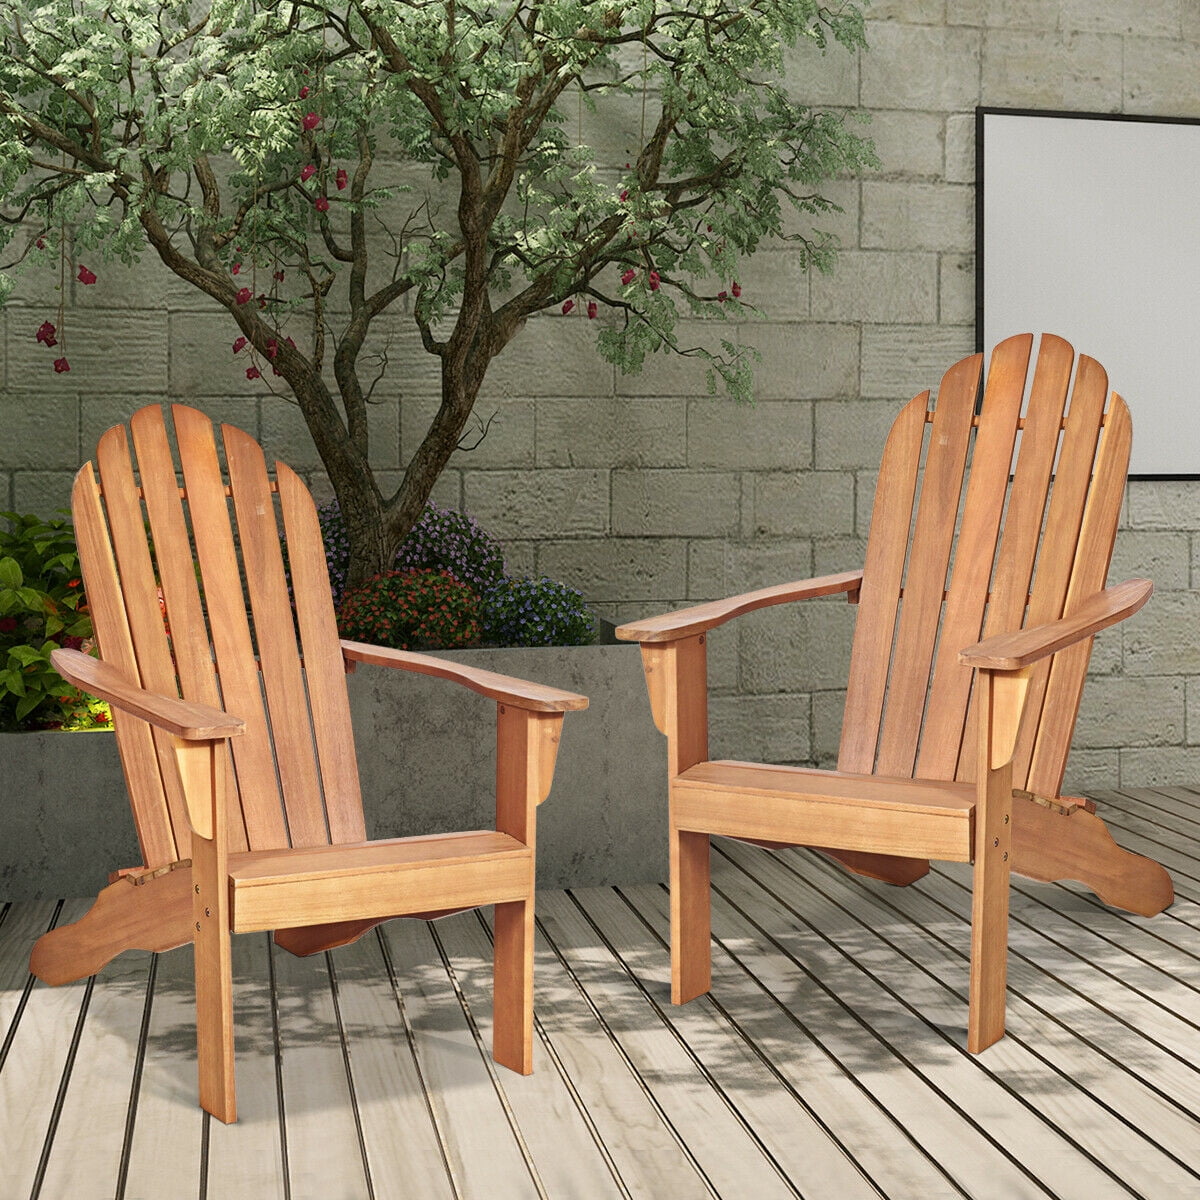 Gymax 2PCS Wooden Classic Adirondack Chair Lounge Chair Outdoor Patio